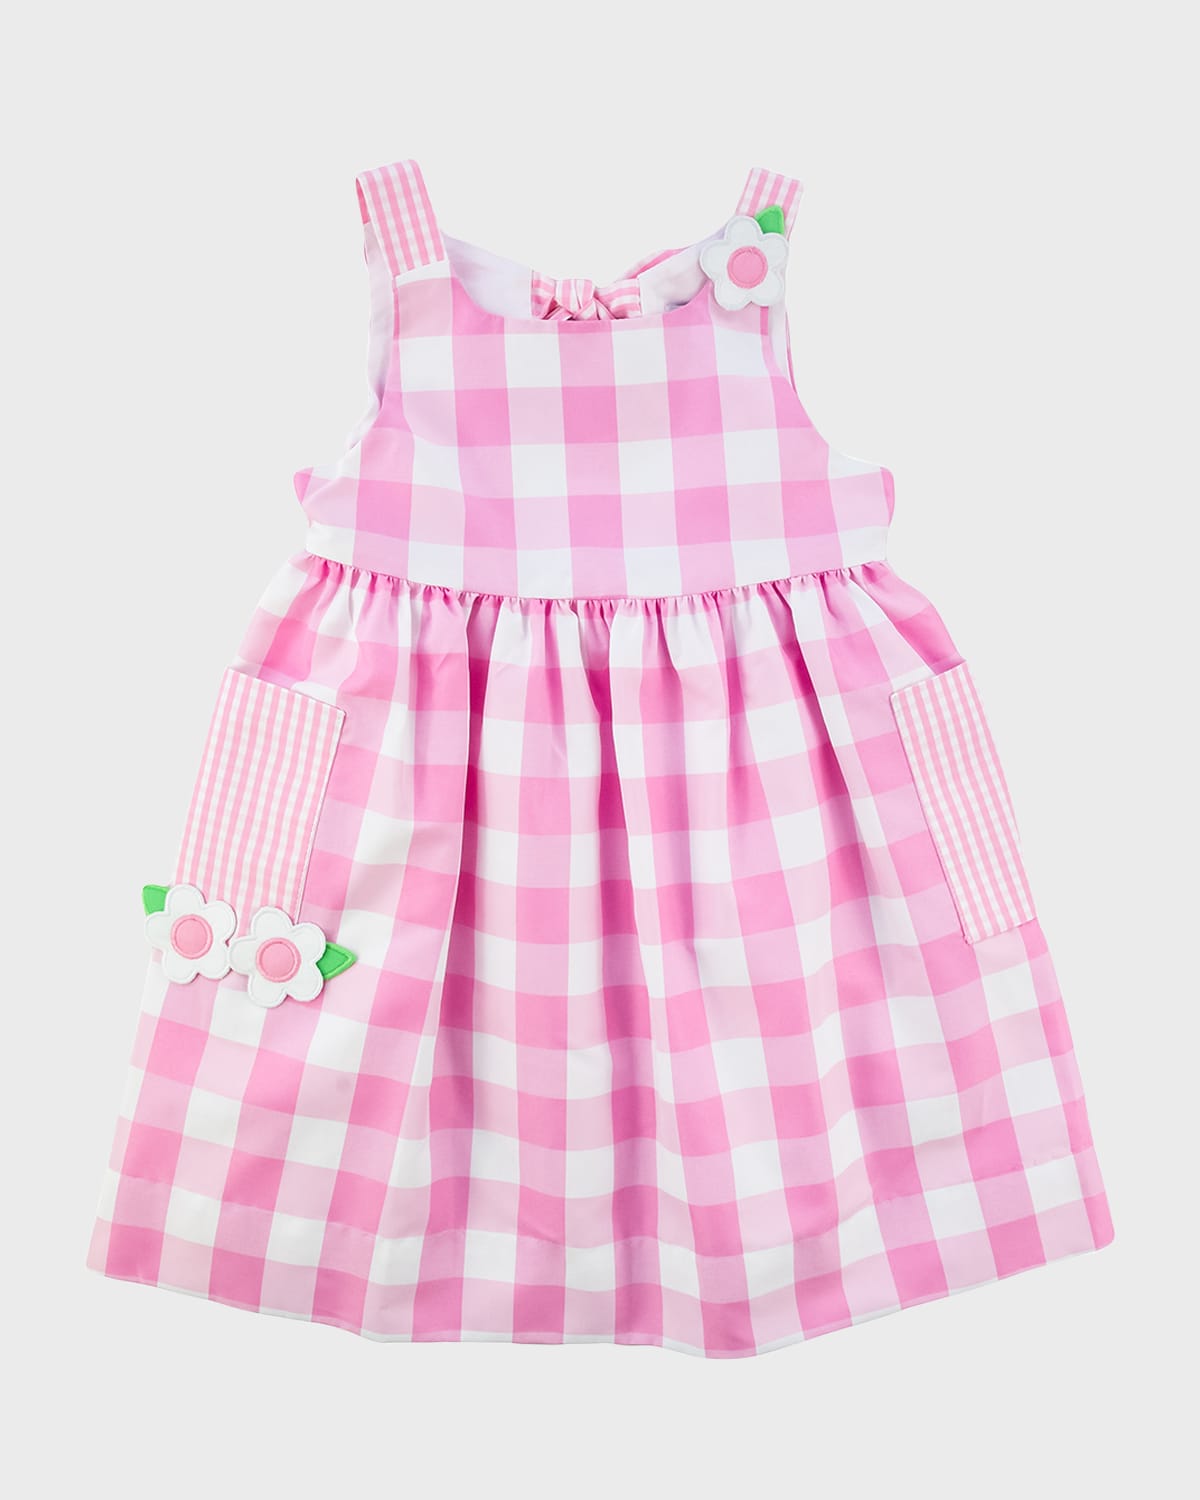 Girl's Gingham Printed Dress W/ Flowers, Size 2-6